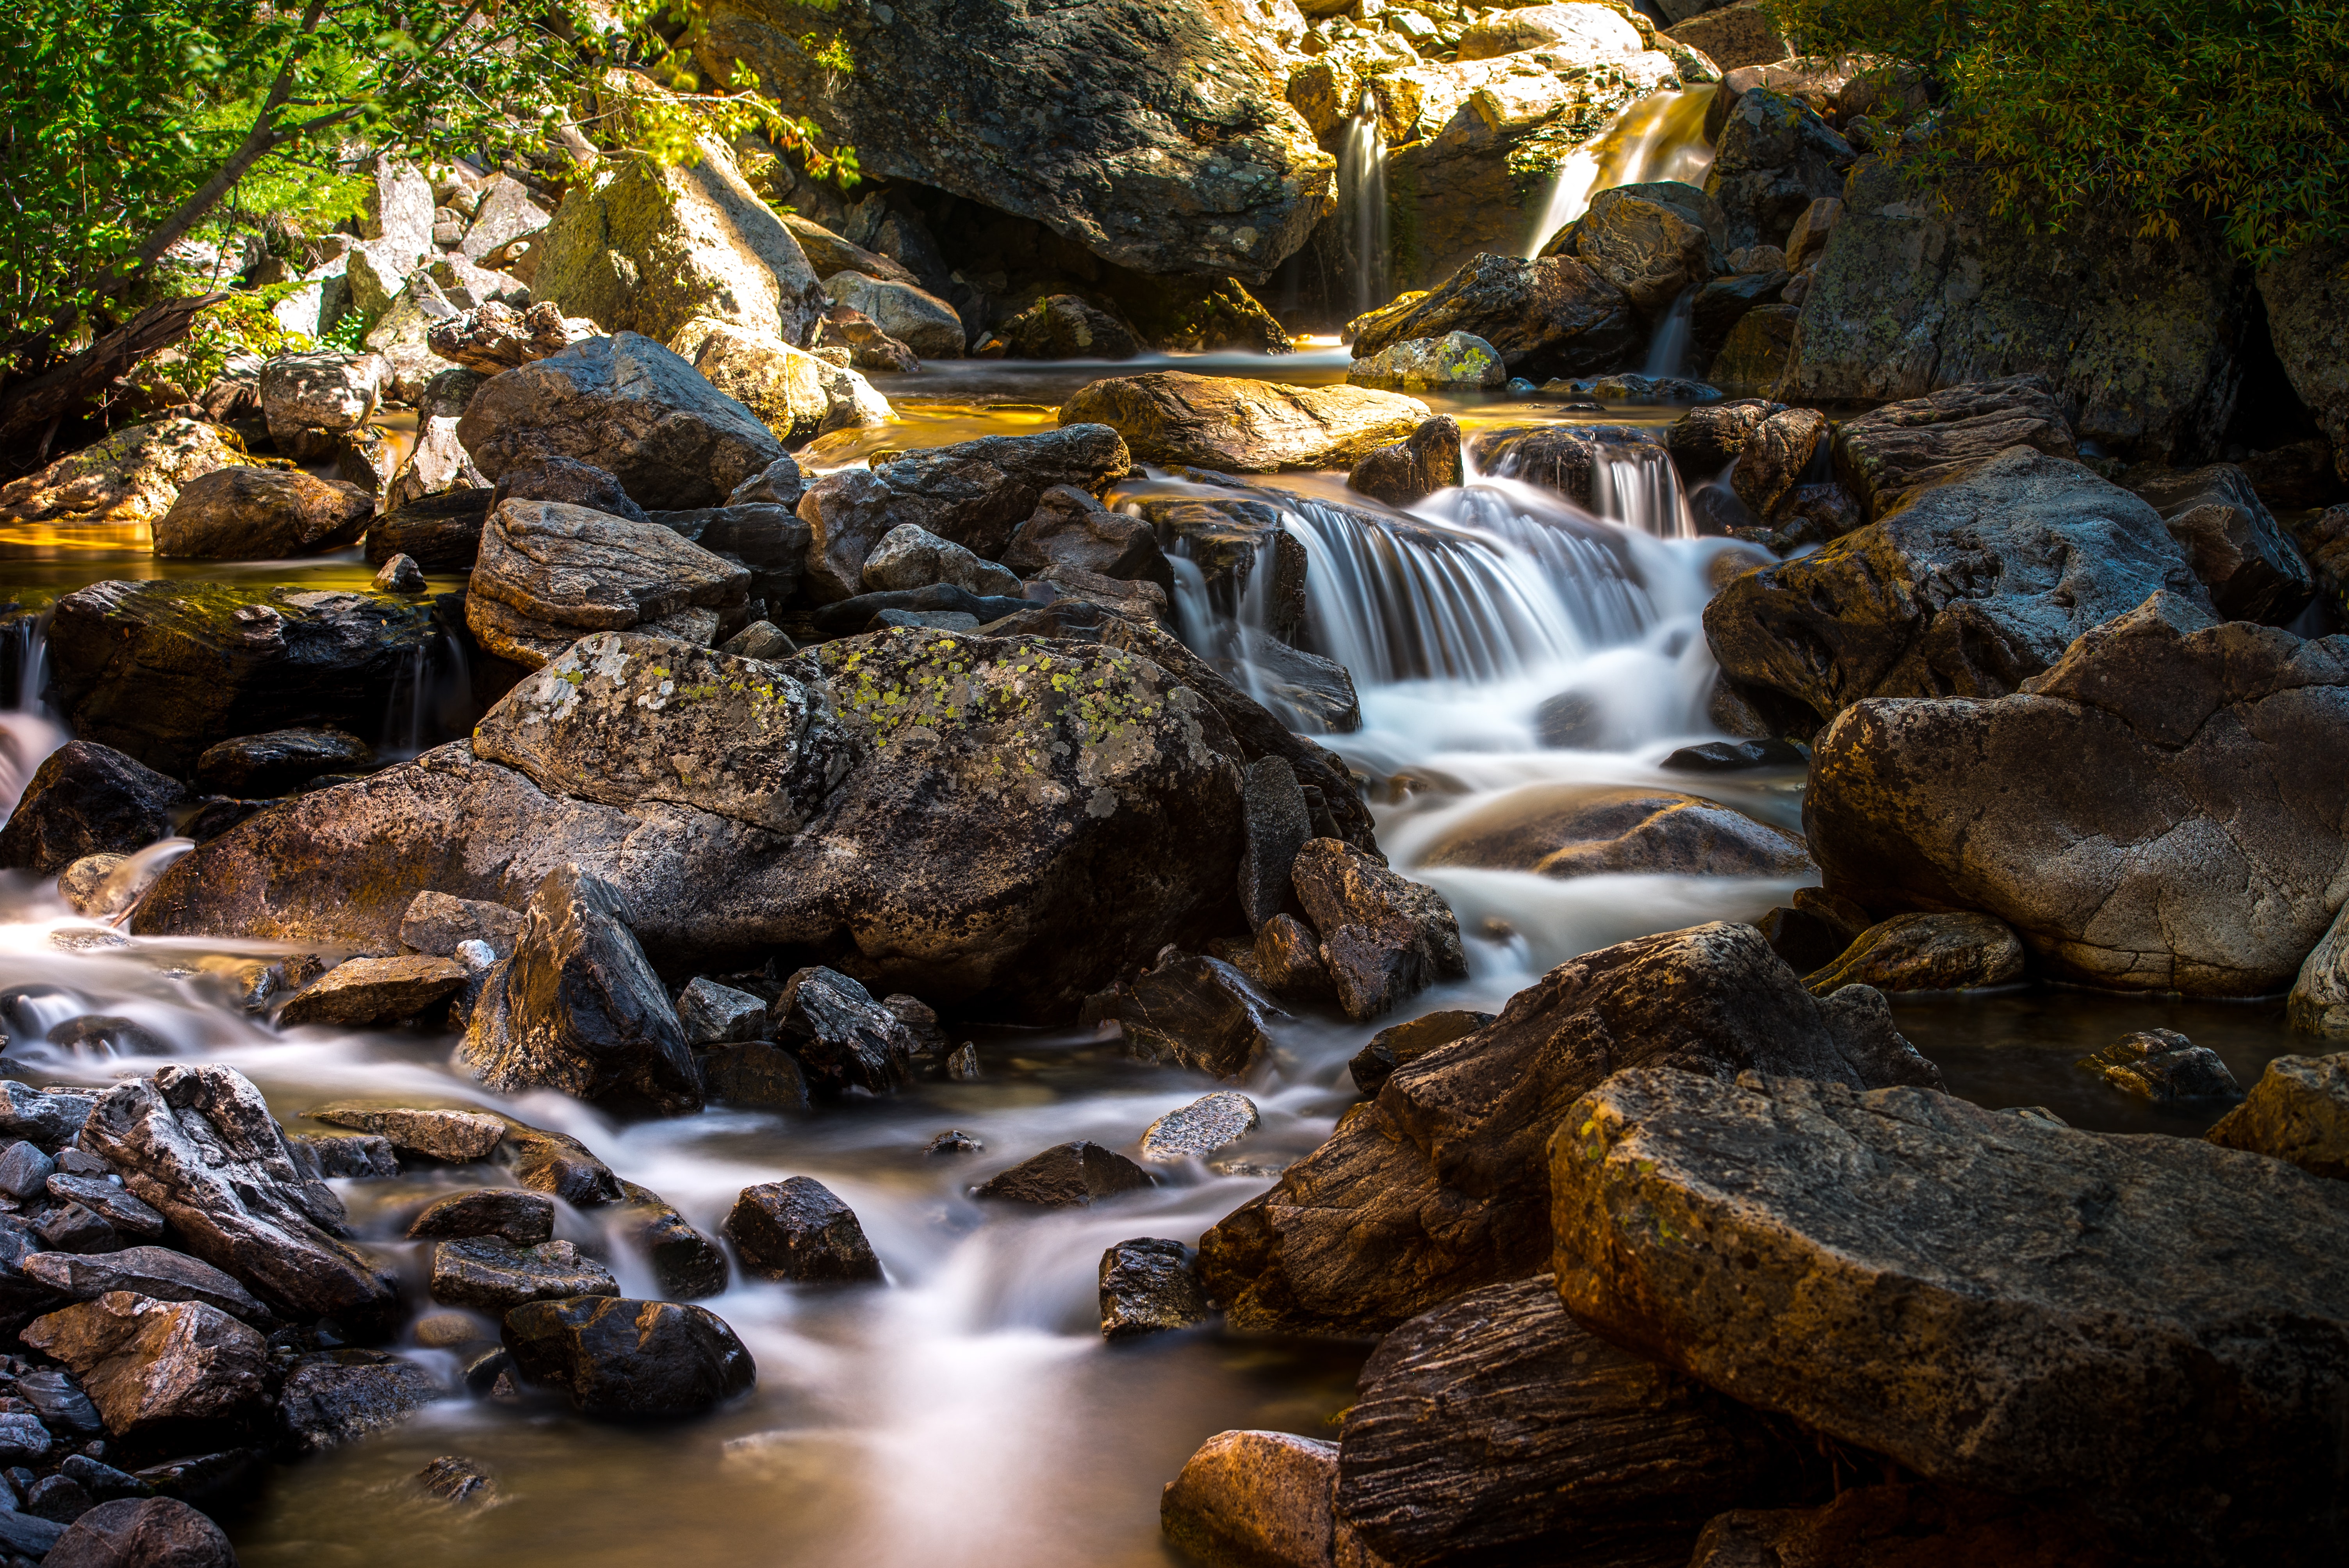 An image of a river flowing over rocks